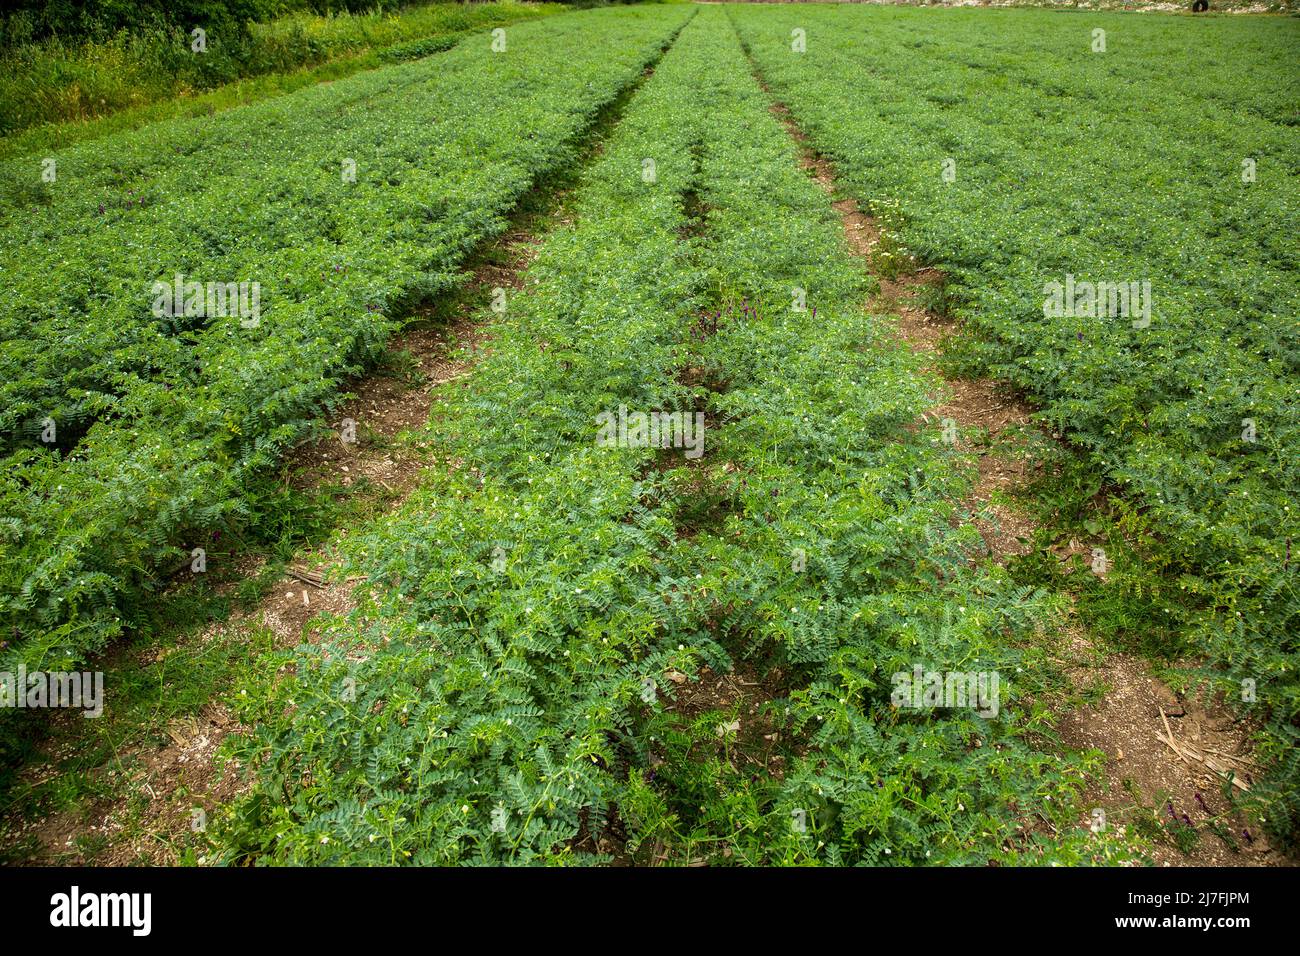 A field of Chickpeas The chickpea or chick pea (Cicer arietinum) is an annual legume of the family Fabaceae, subfamily Faboideae.Its different types a Stock Photo